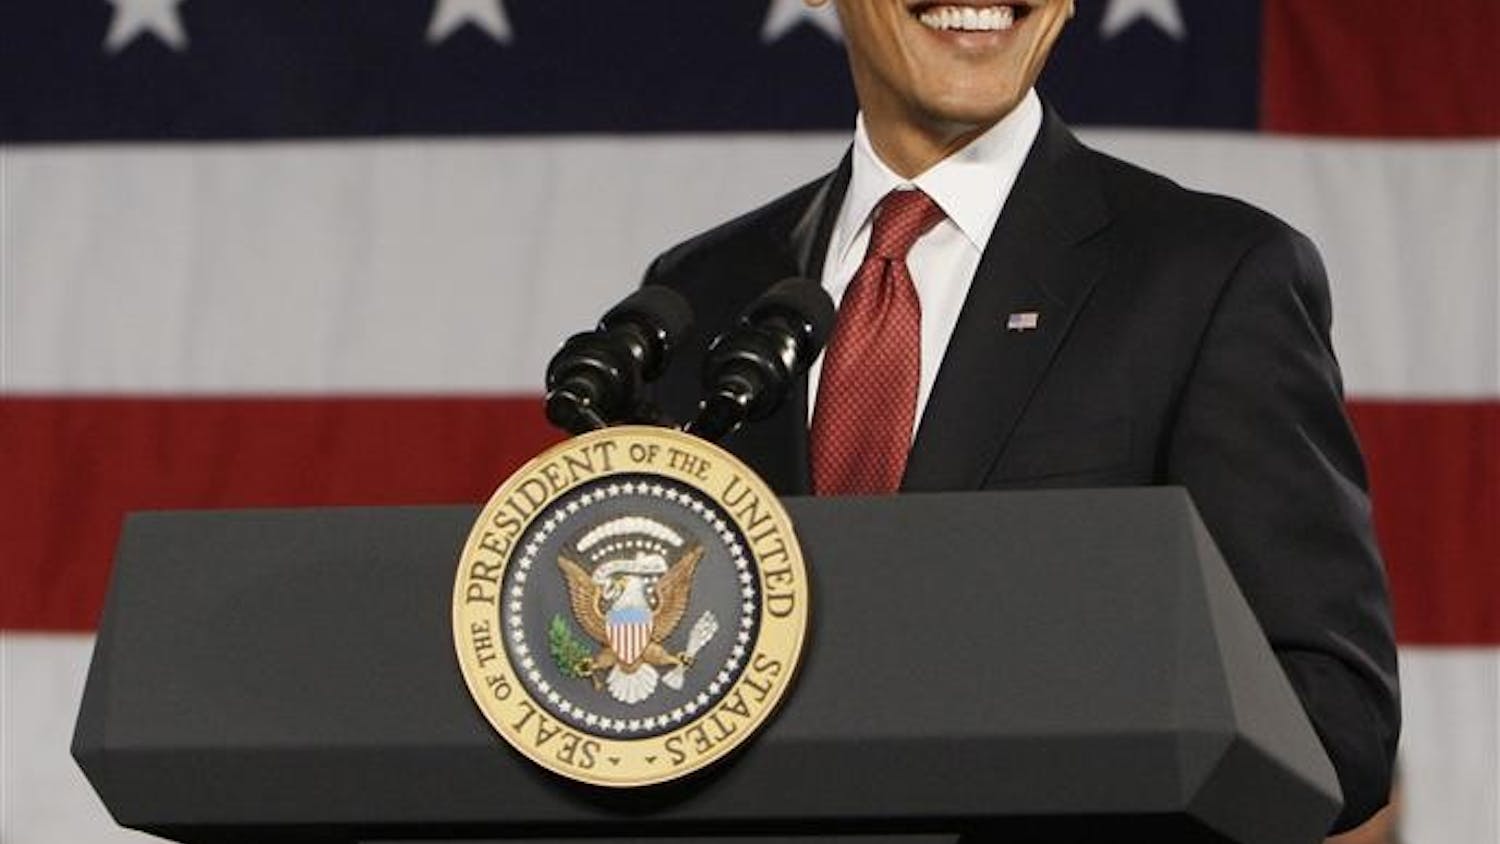 President Barack Obama holds a town hall style meeting about the economic stimulus package at Concord Community High School on Monday in Elkhart, Ind.